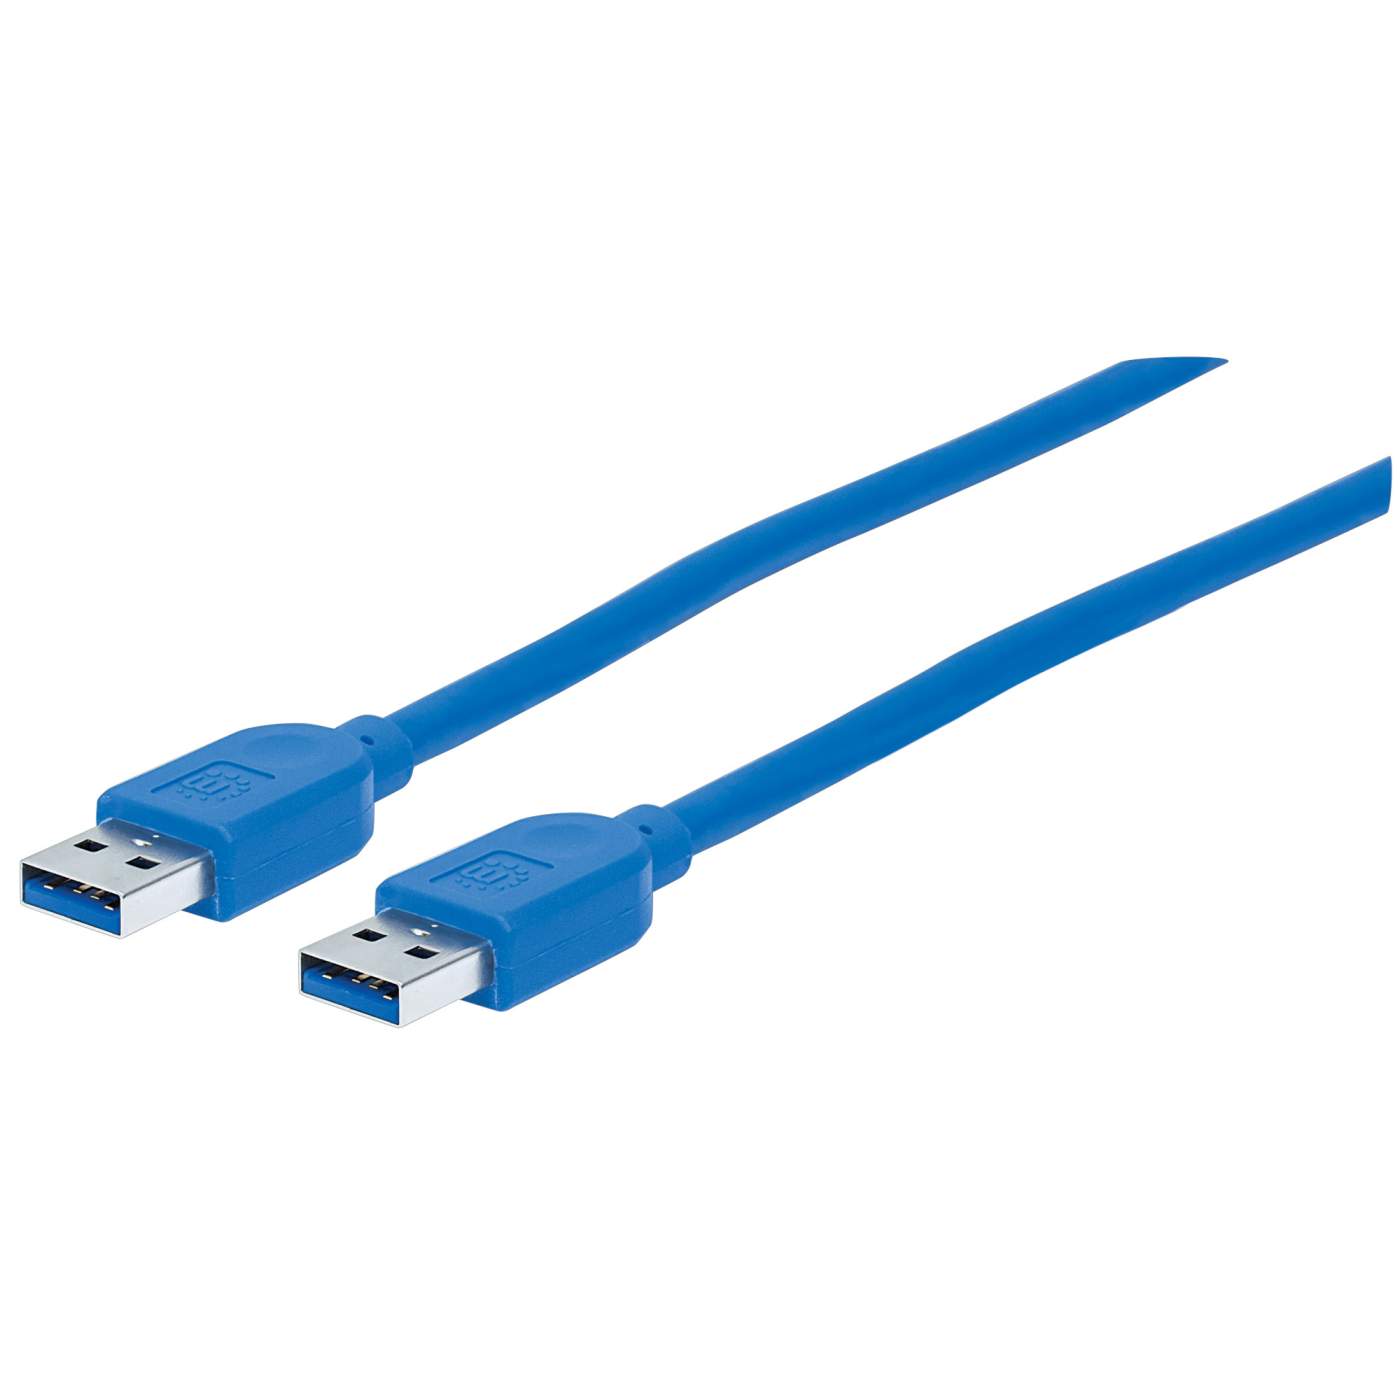 USB 3.0 Type-A Device Cable Image 1